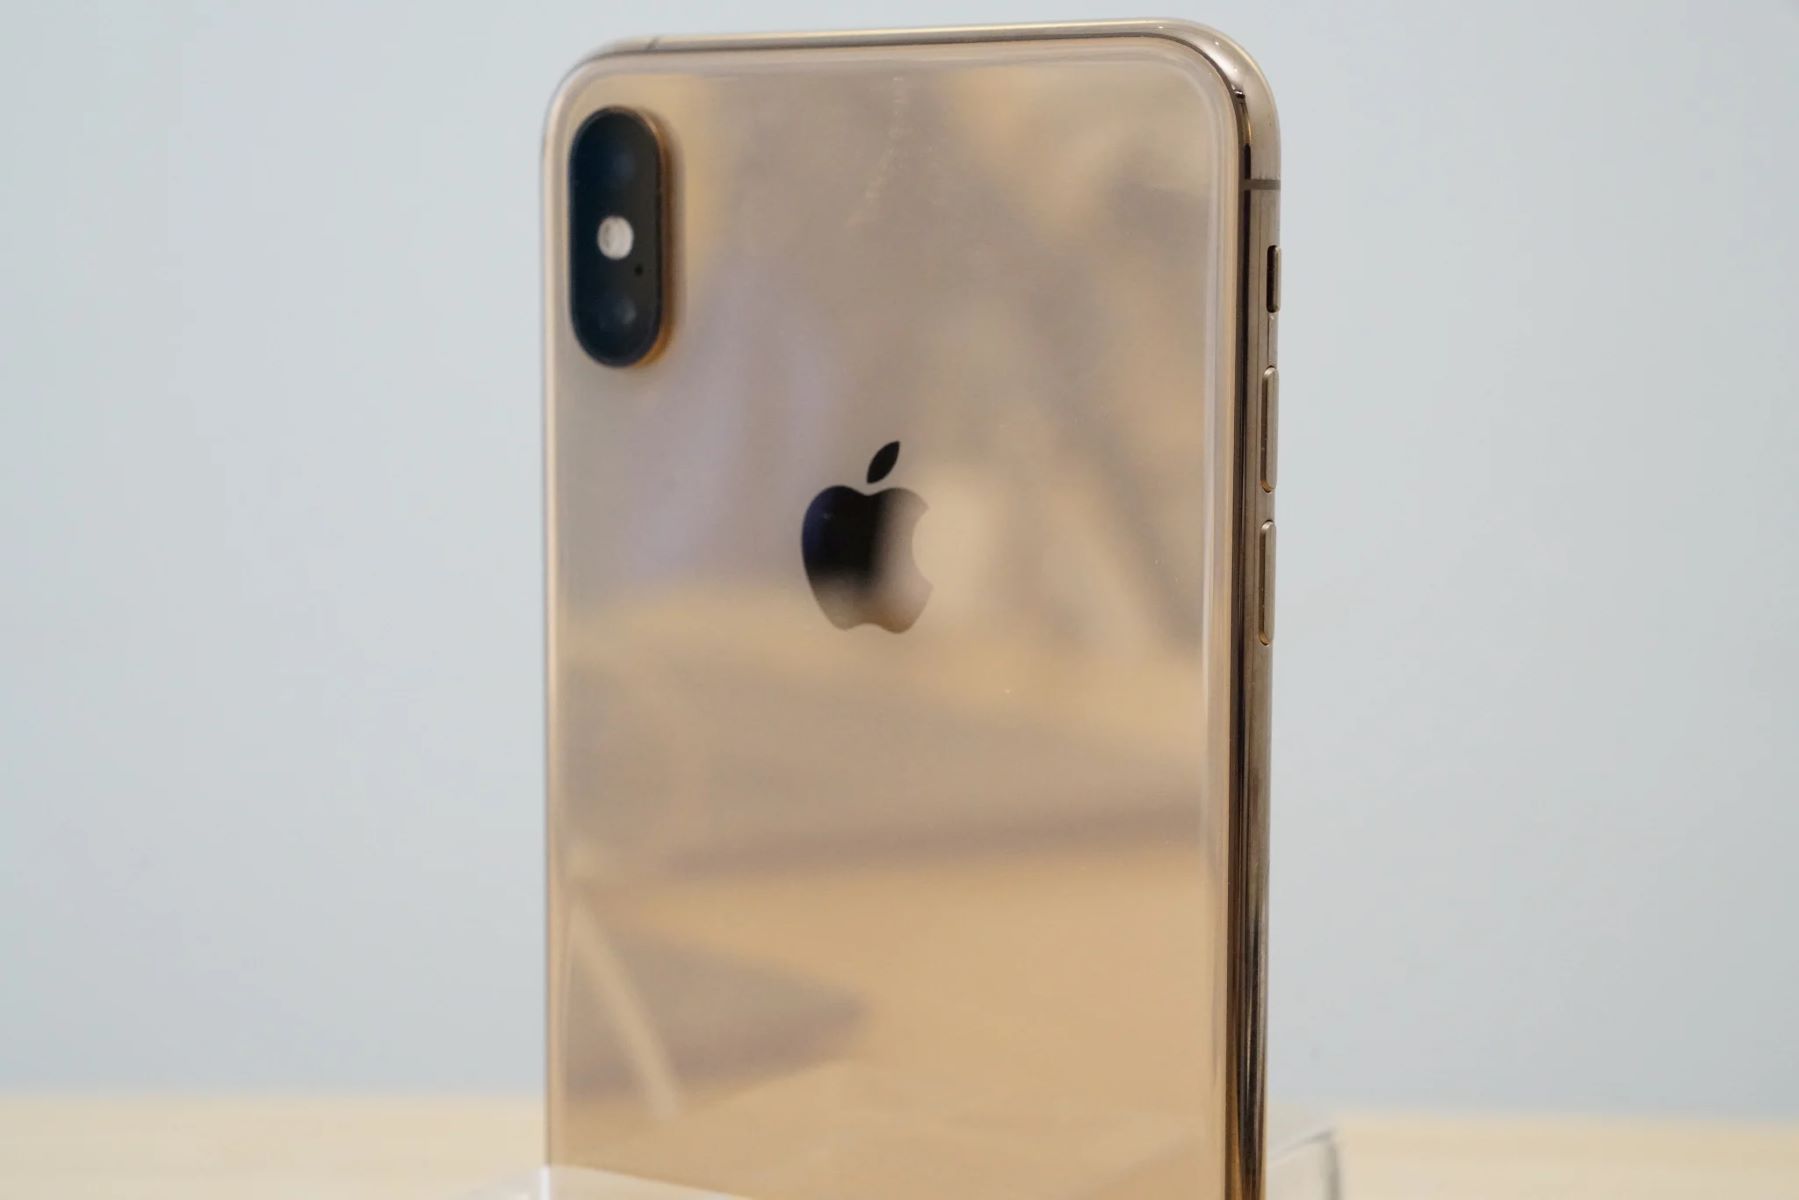 XS Max Reset: Resetting Procedures For IPhone 10